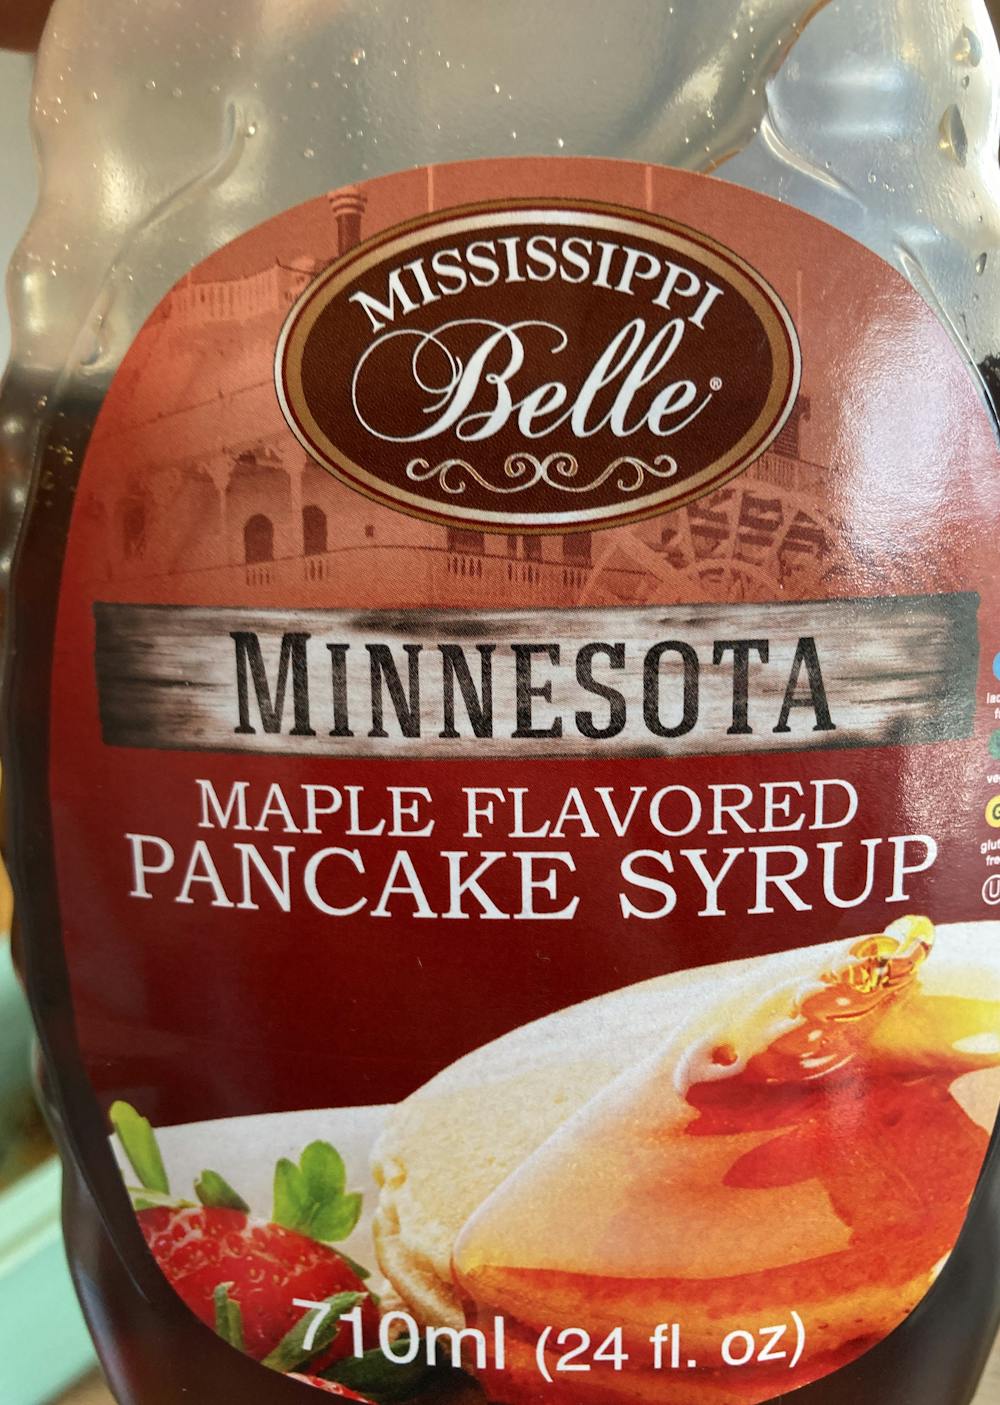 Maple flavored pancake sirup, Mississippi belle